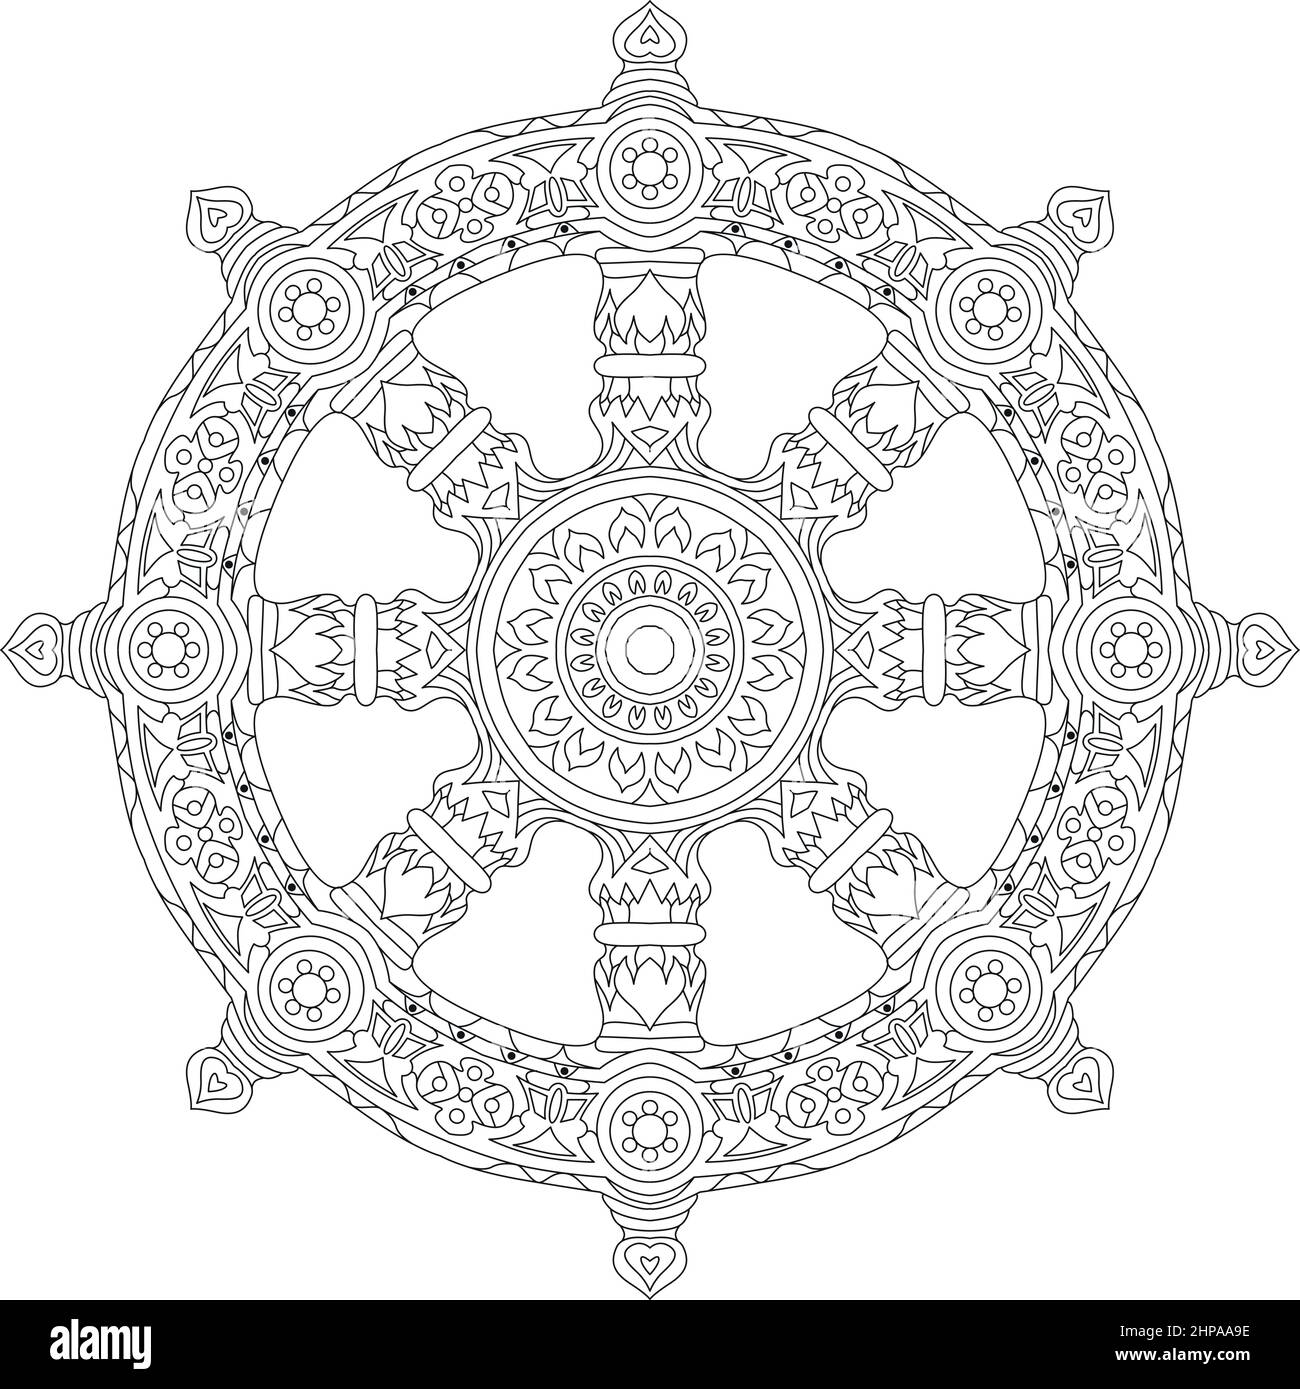 Dharma Wheel, Dharmachakra. Symbol of Buddha s teachings on the path to enlightenment, liberation from the karmic. For coloring Stock Vector